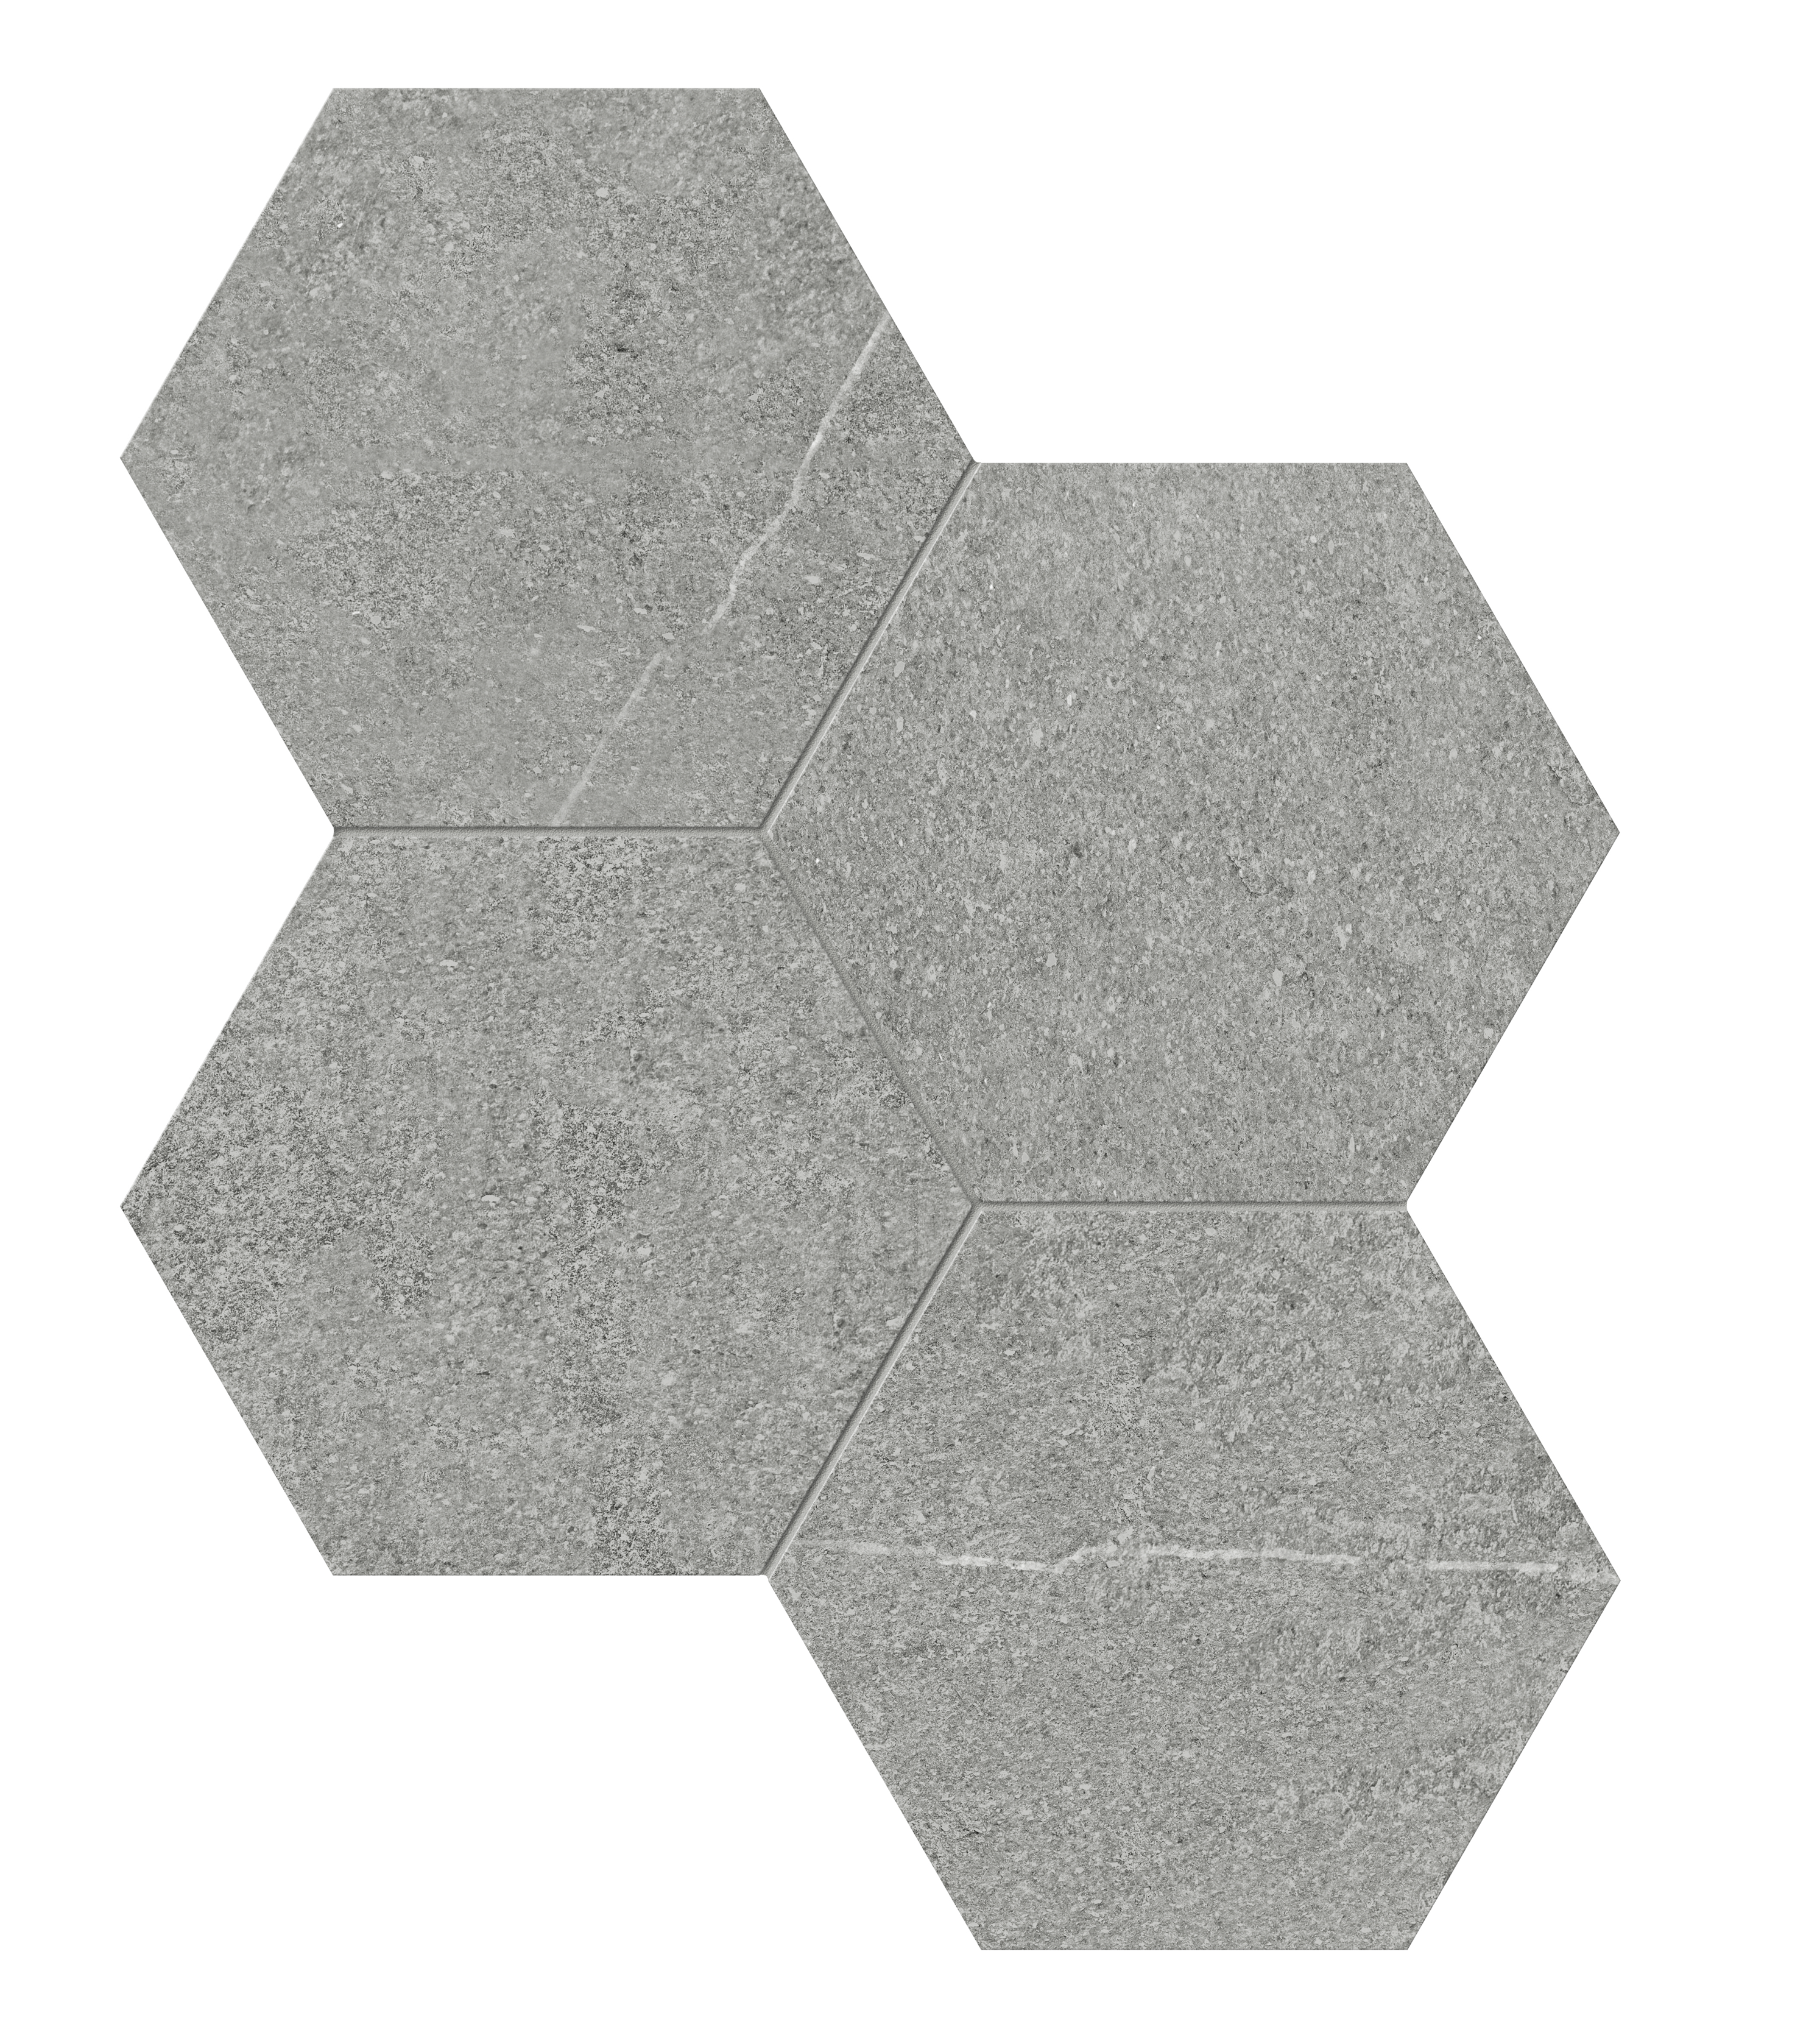 mica hexagon 6-inch pattern color body porcelain mosaic from mjork anatolia collection distributed by surface group international matte finish straight edge edge mesh shape